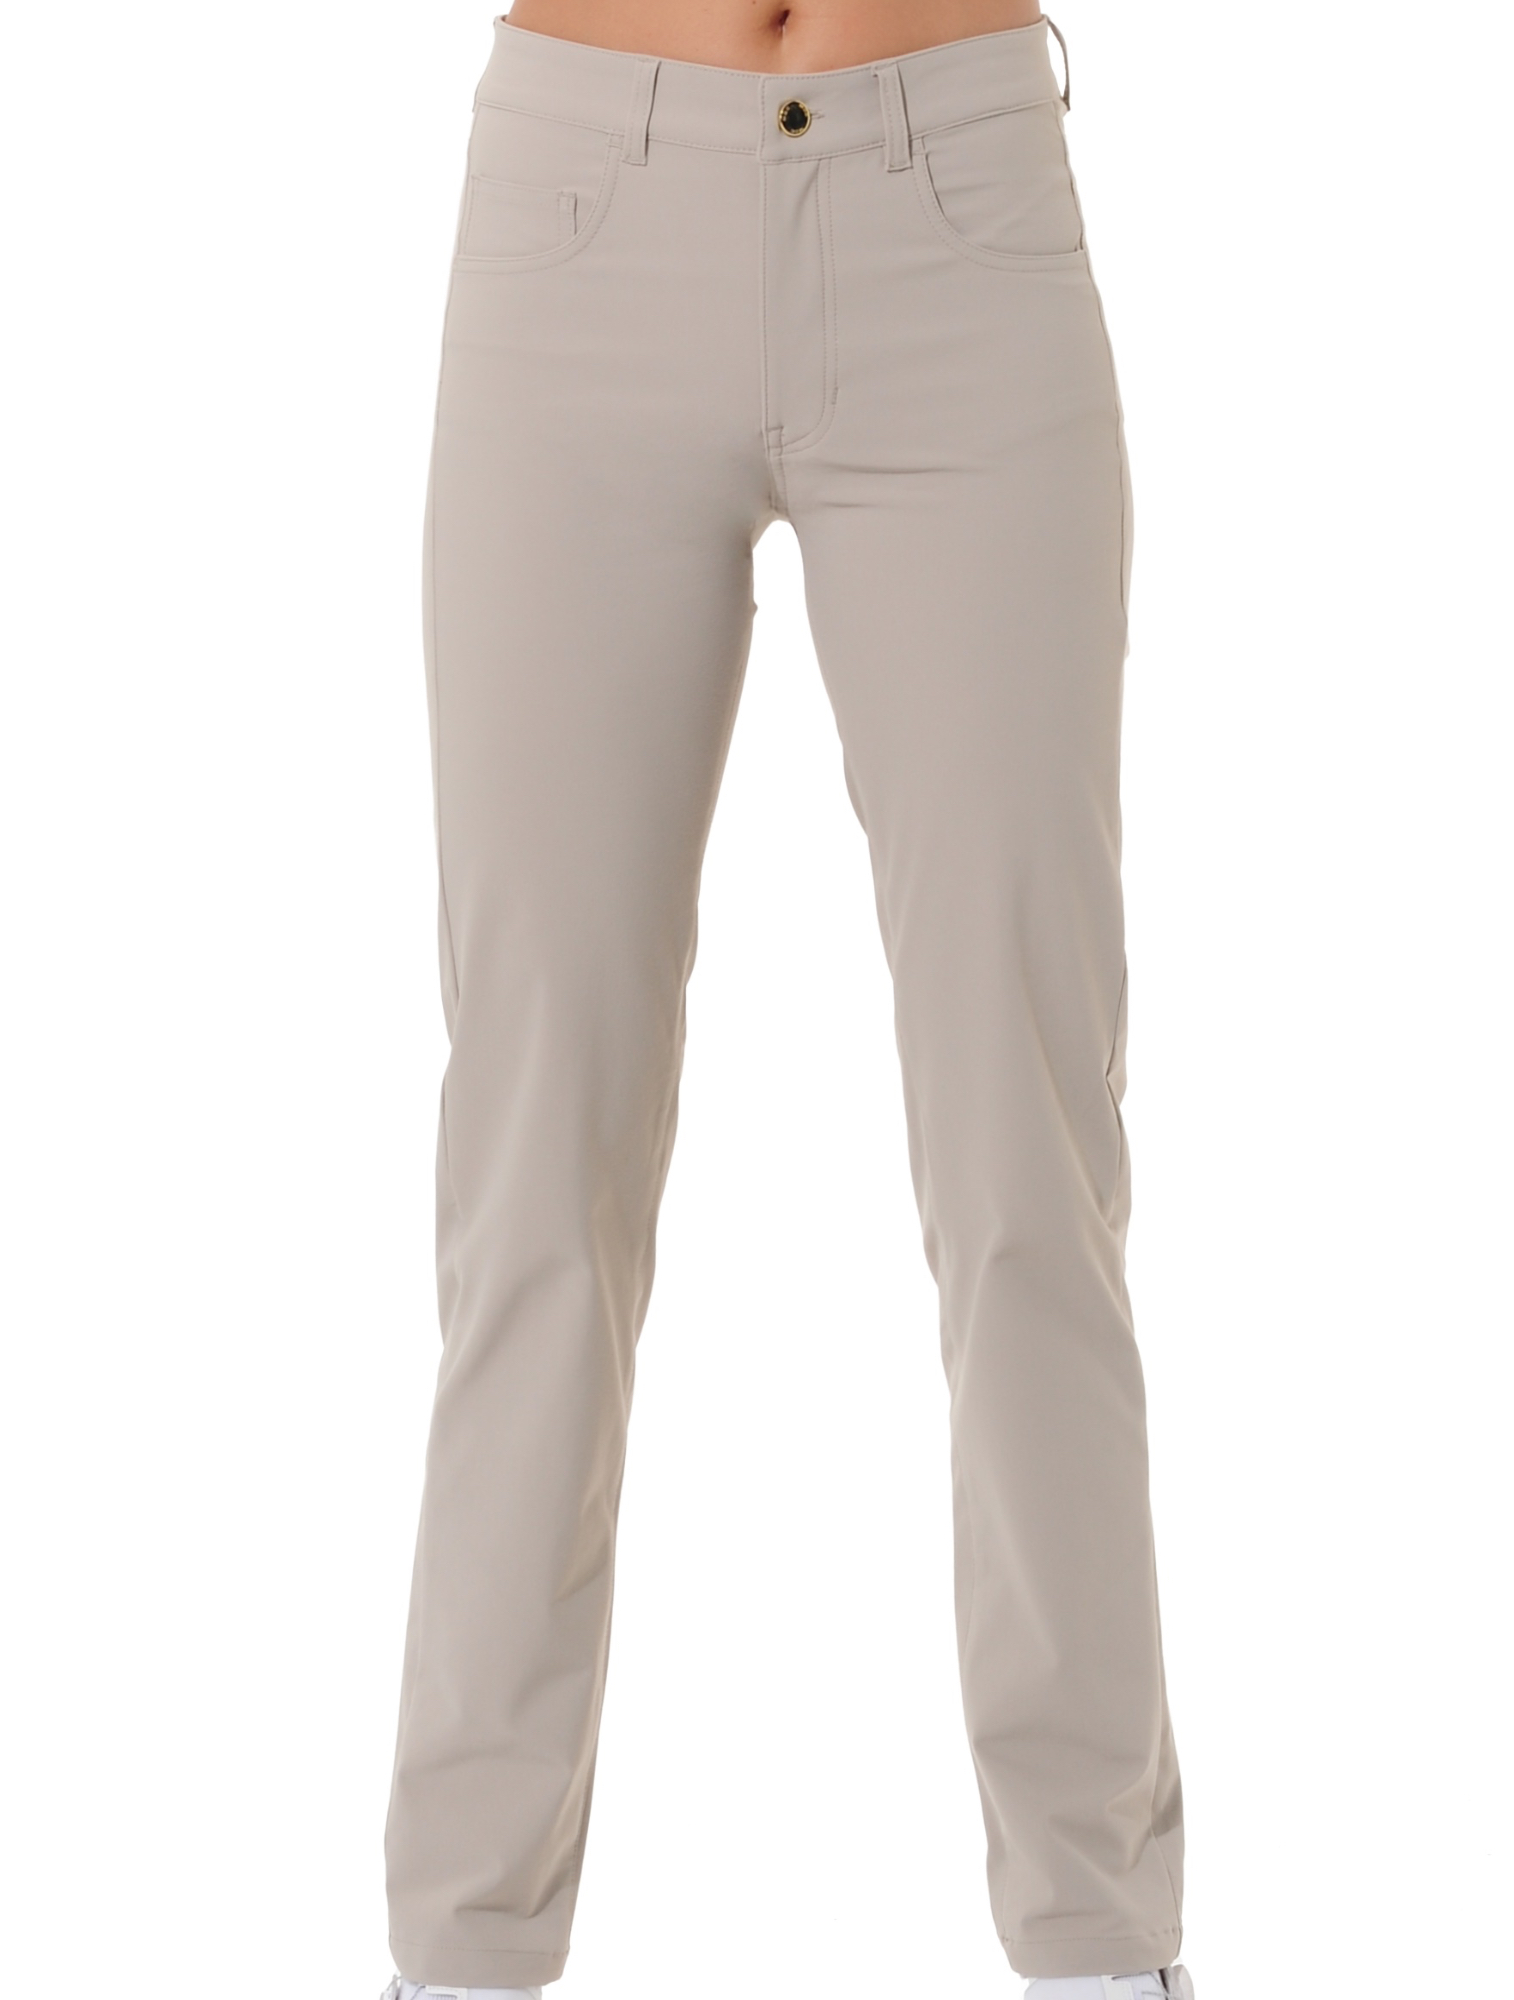 4way stretch long straight cut pants light taupe